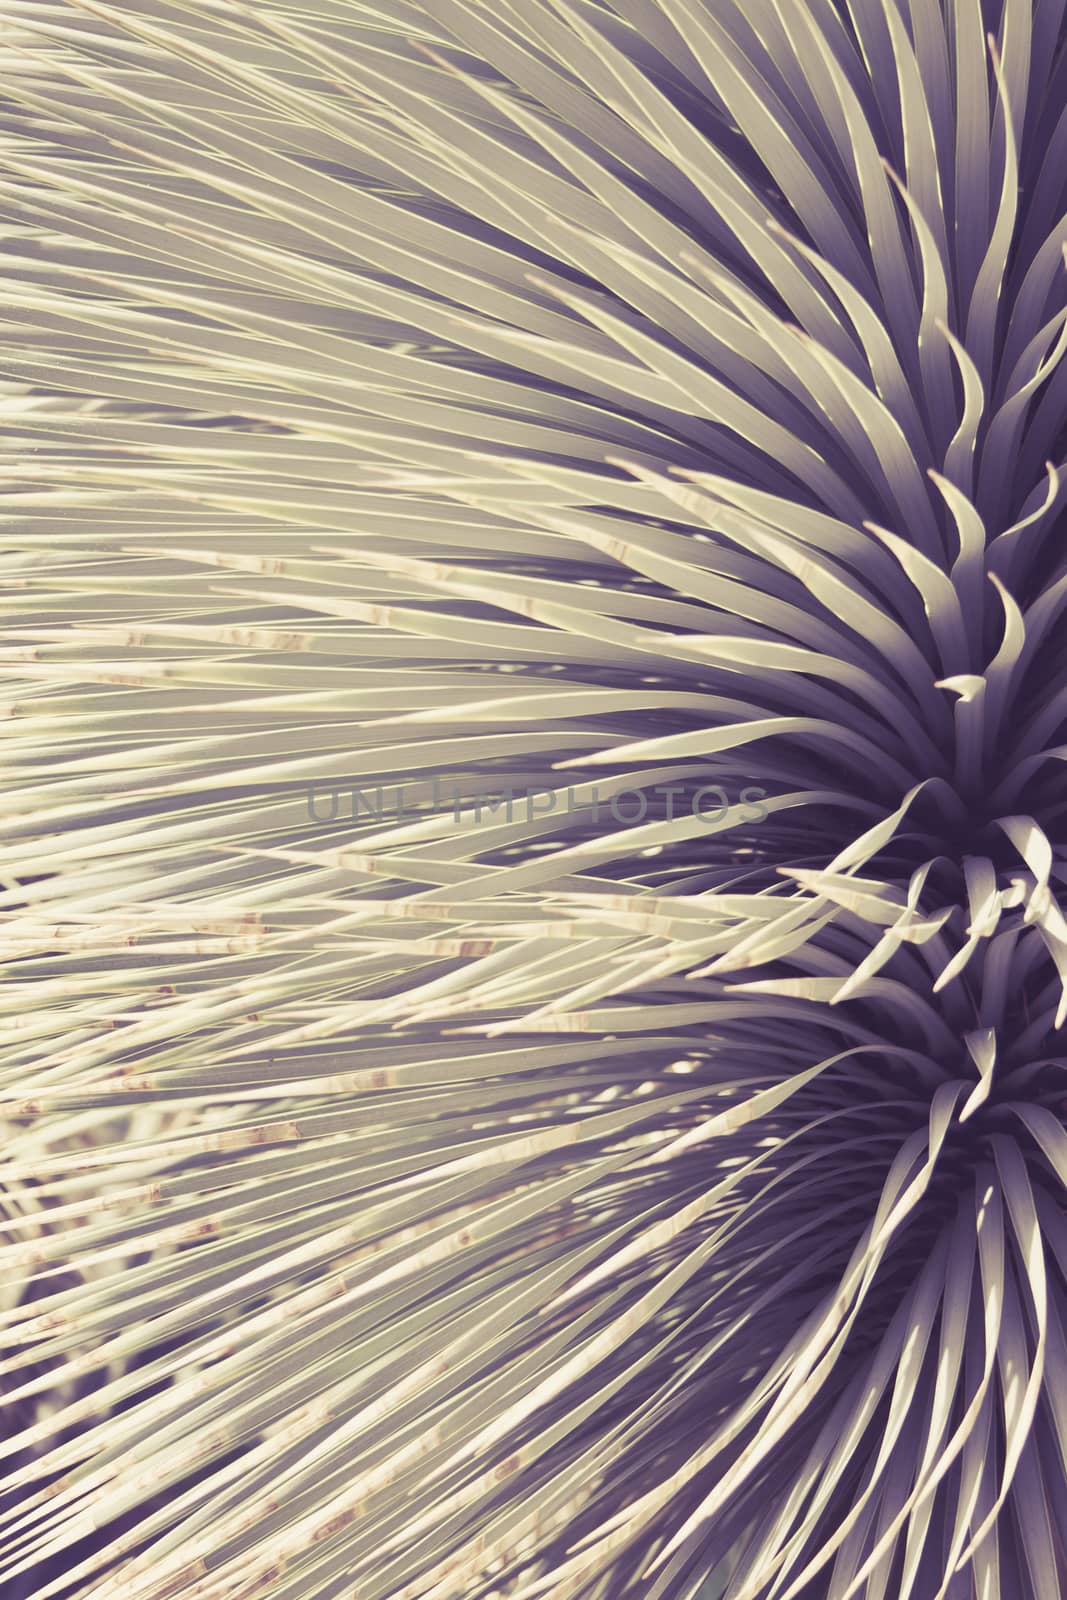 Spiked Agave plant close up, art background by worrayuth